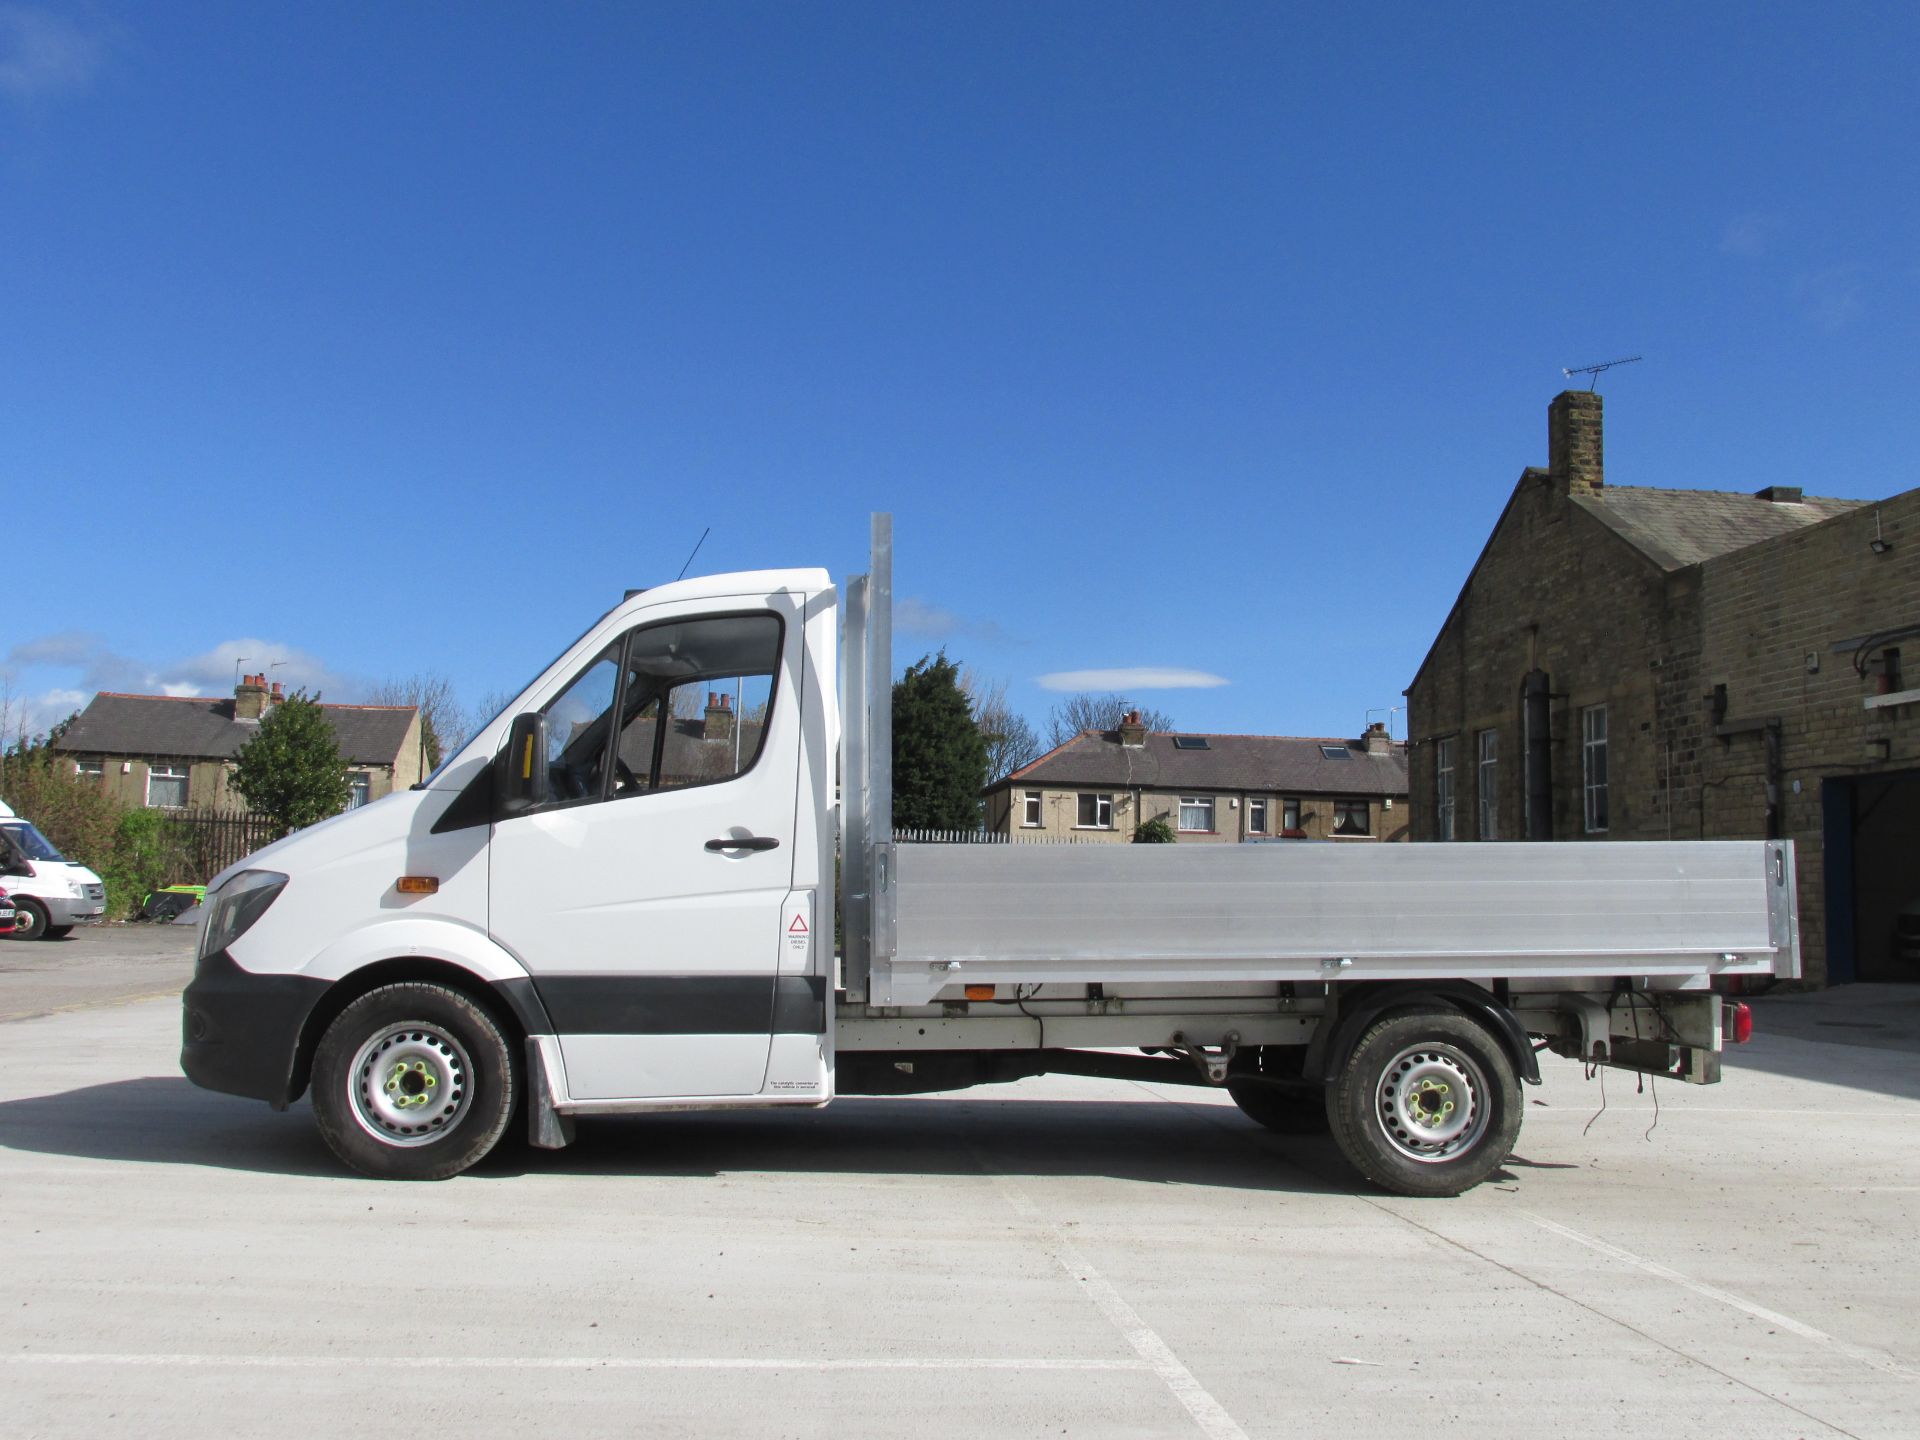 2014 Mercedes sprinter 313 Cdi dropside - 128630 Miles Warranted - Image 2 of 9